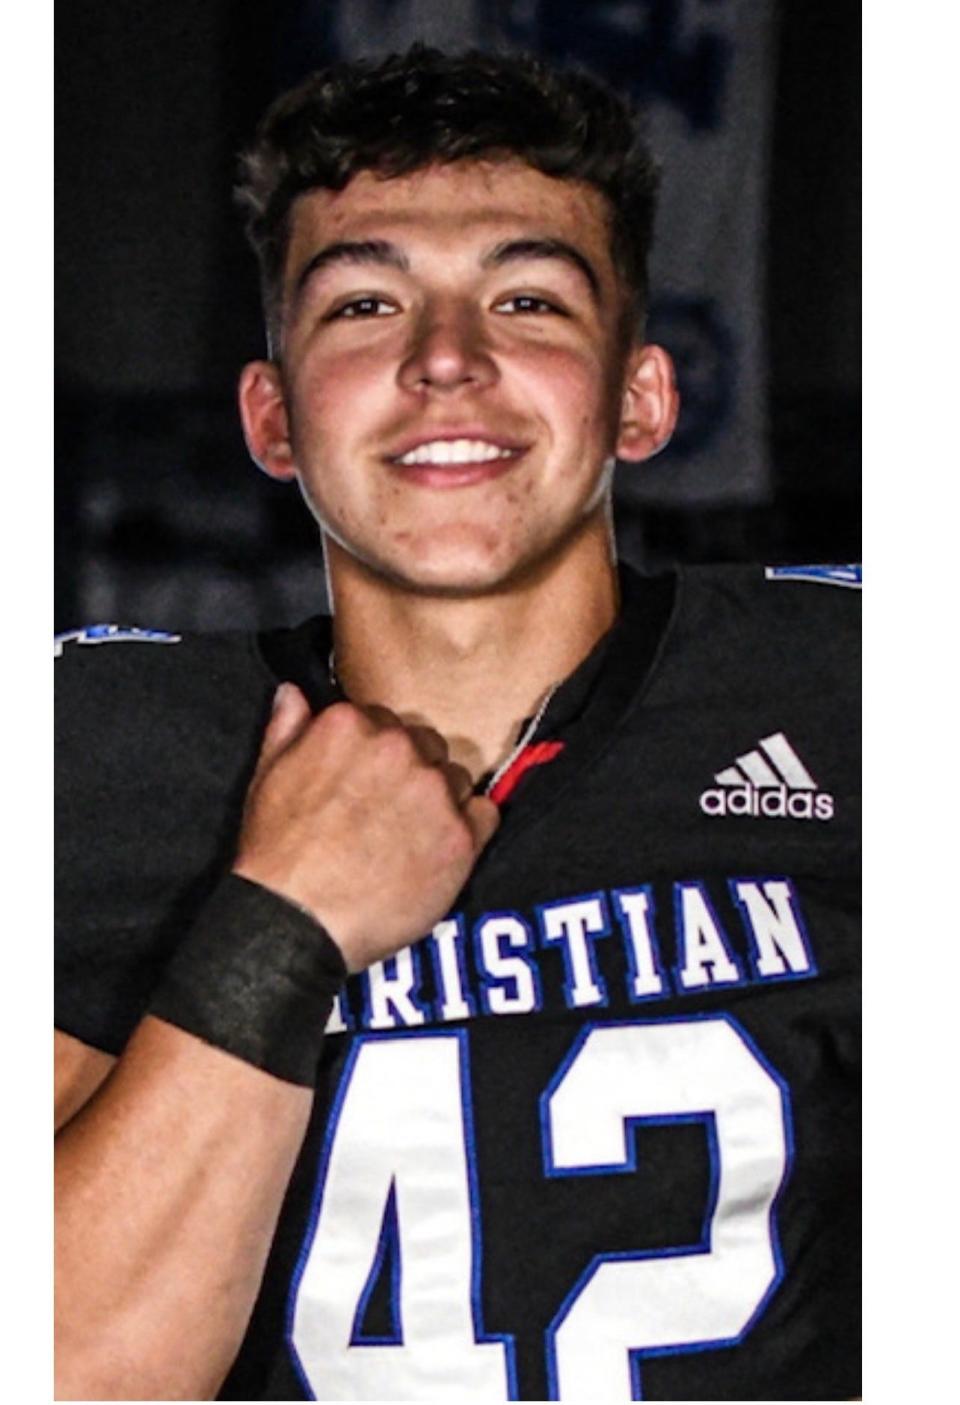 Lexington Christian running back Brady Hensley has been selected to The Courier Journal's All-State football first team.